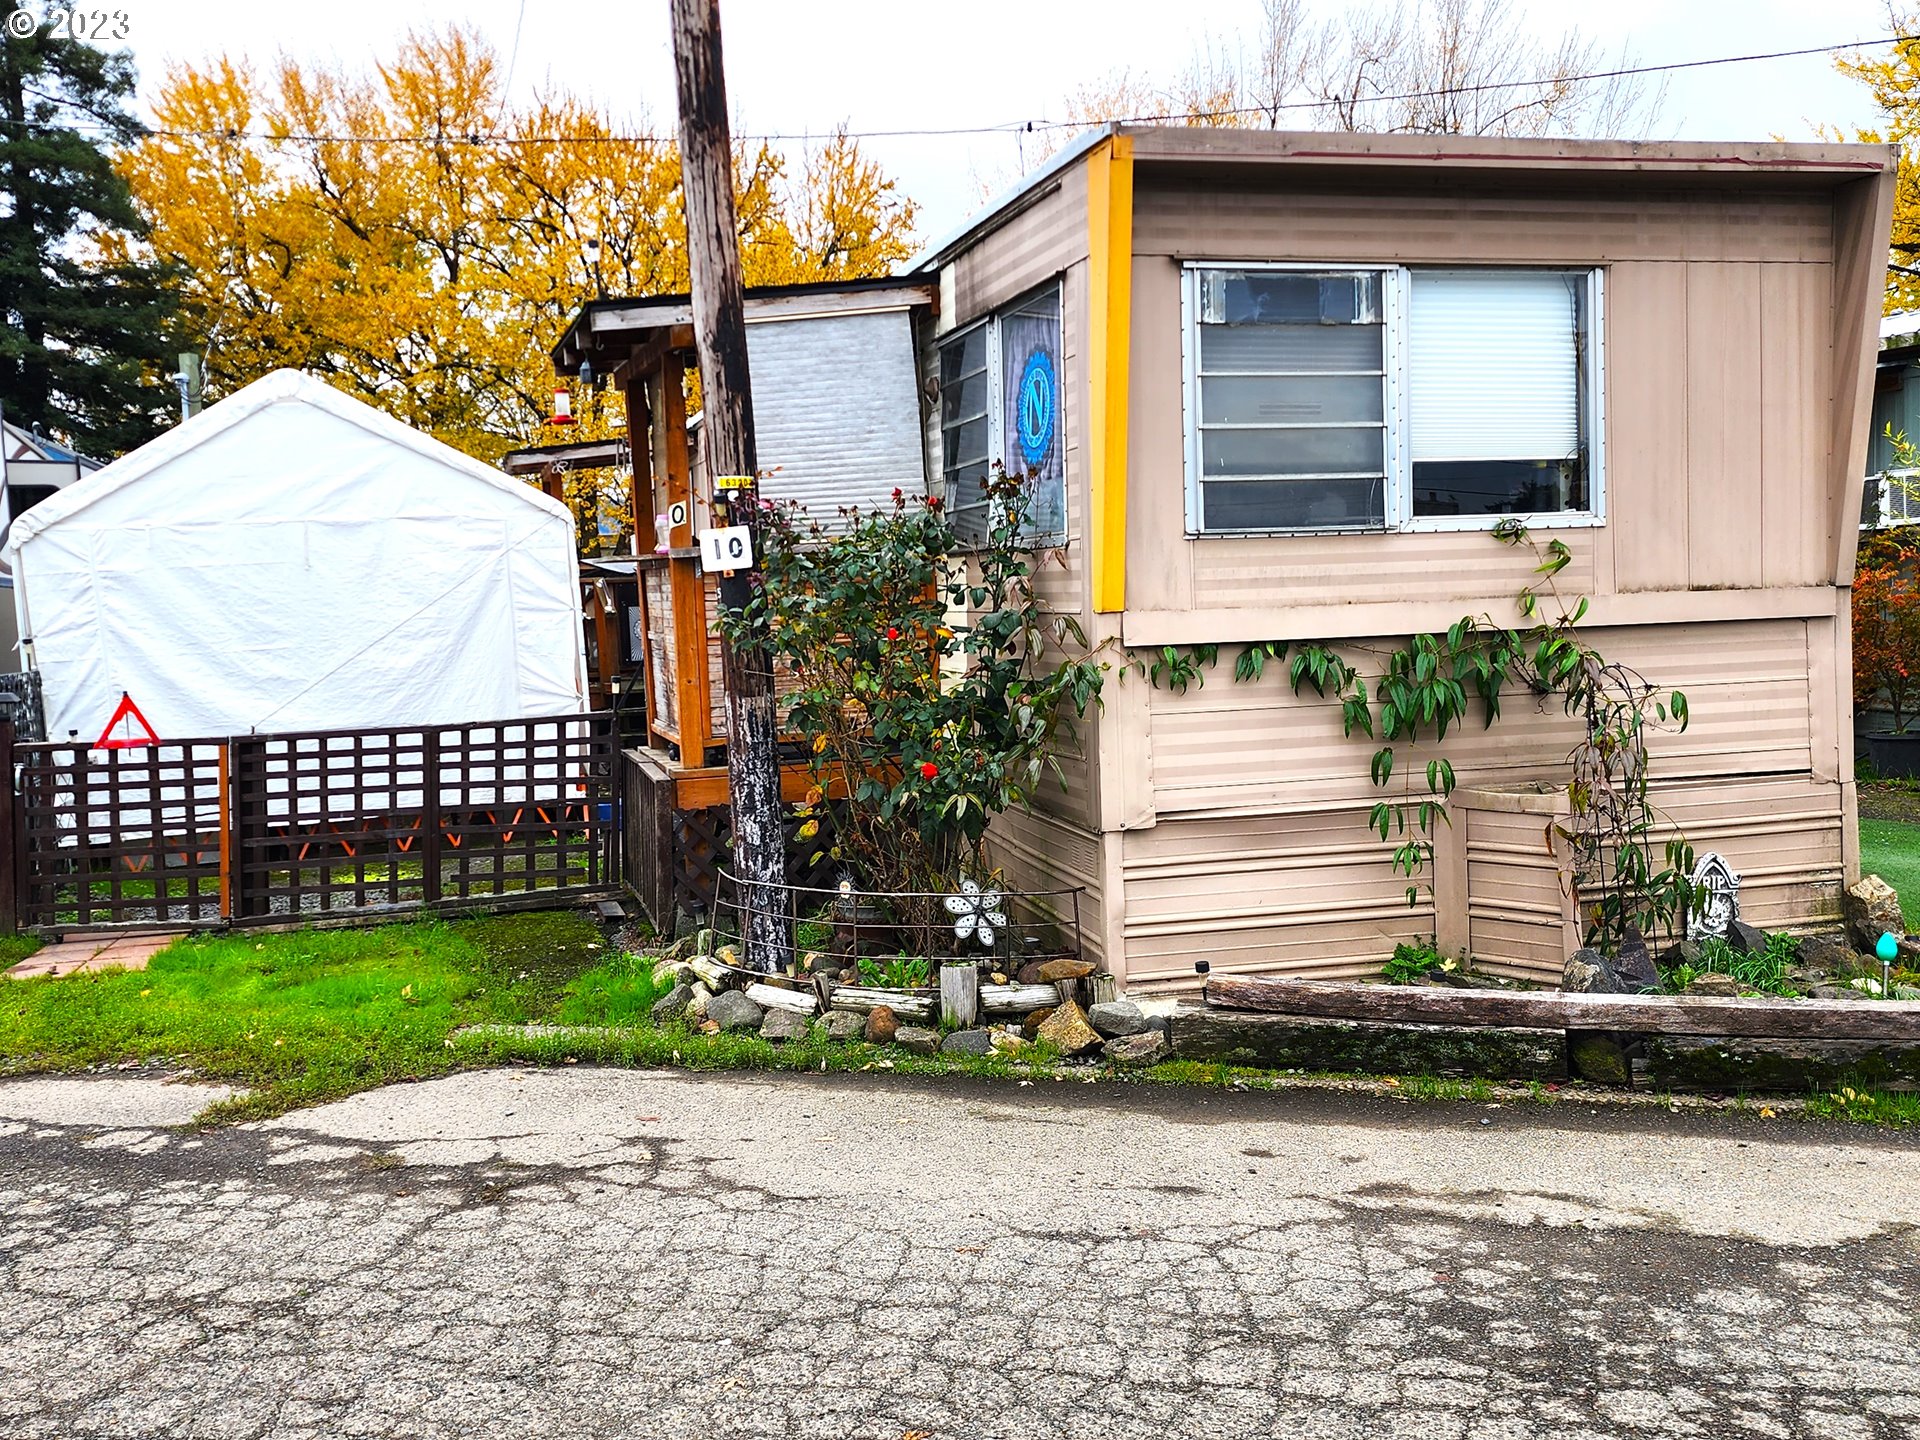 Nestled in a small mobile home park, this unit is a cozy 2 bedroom 1 bath unit is ready for a new owner occupant or investor for a rental. Kitchen comes equipped  with a fS refrigerator and space and 220 outlet for a range. Close to shopping, bus line, hospital, schools.